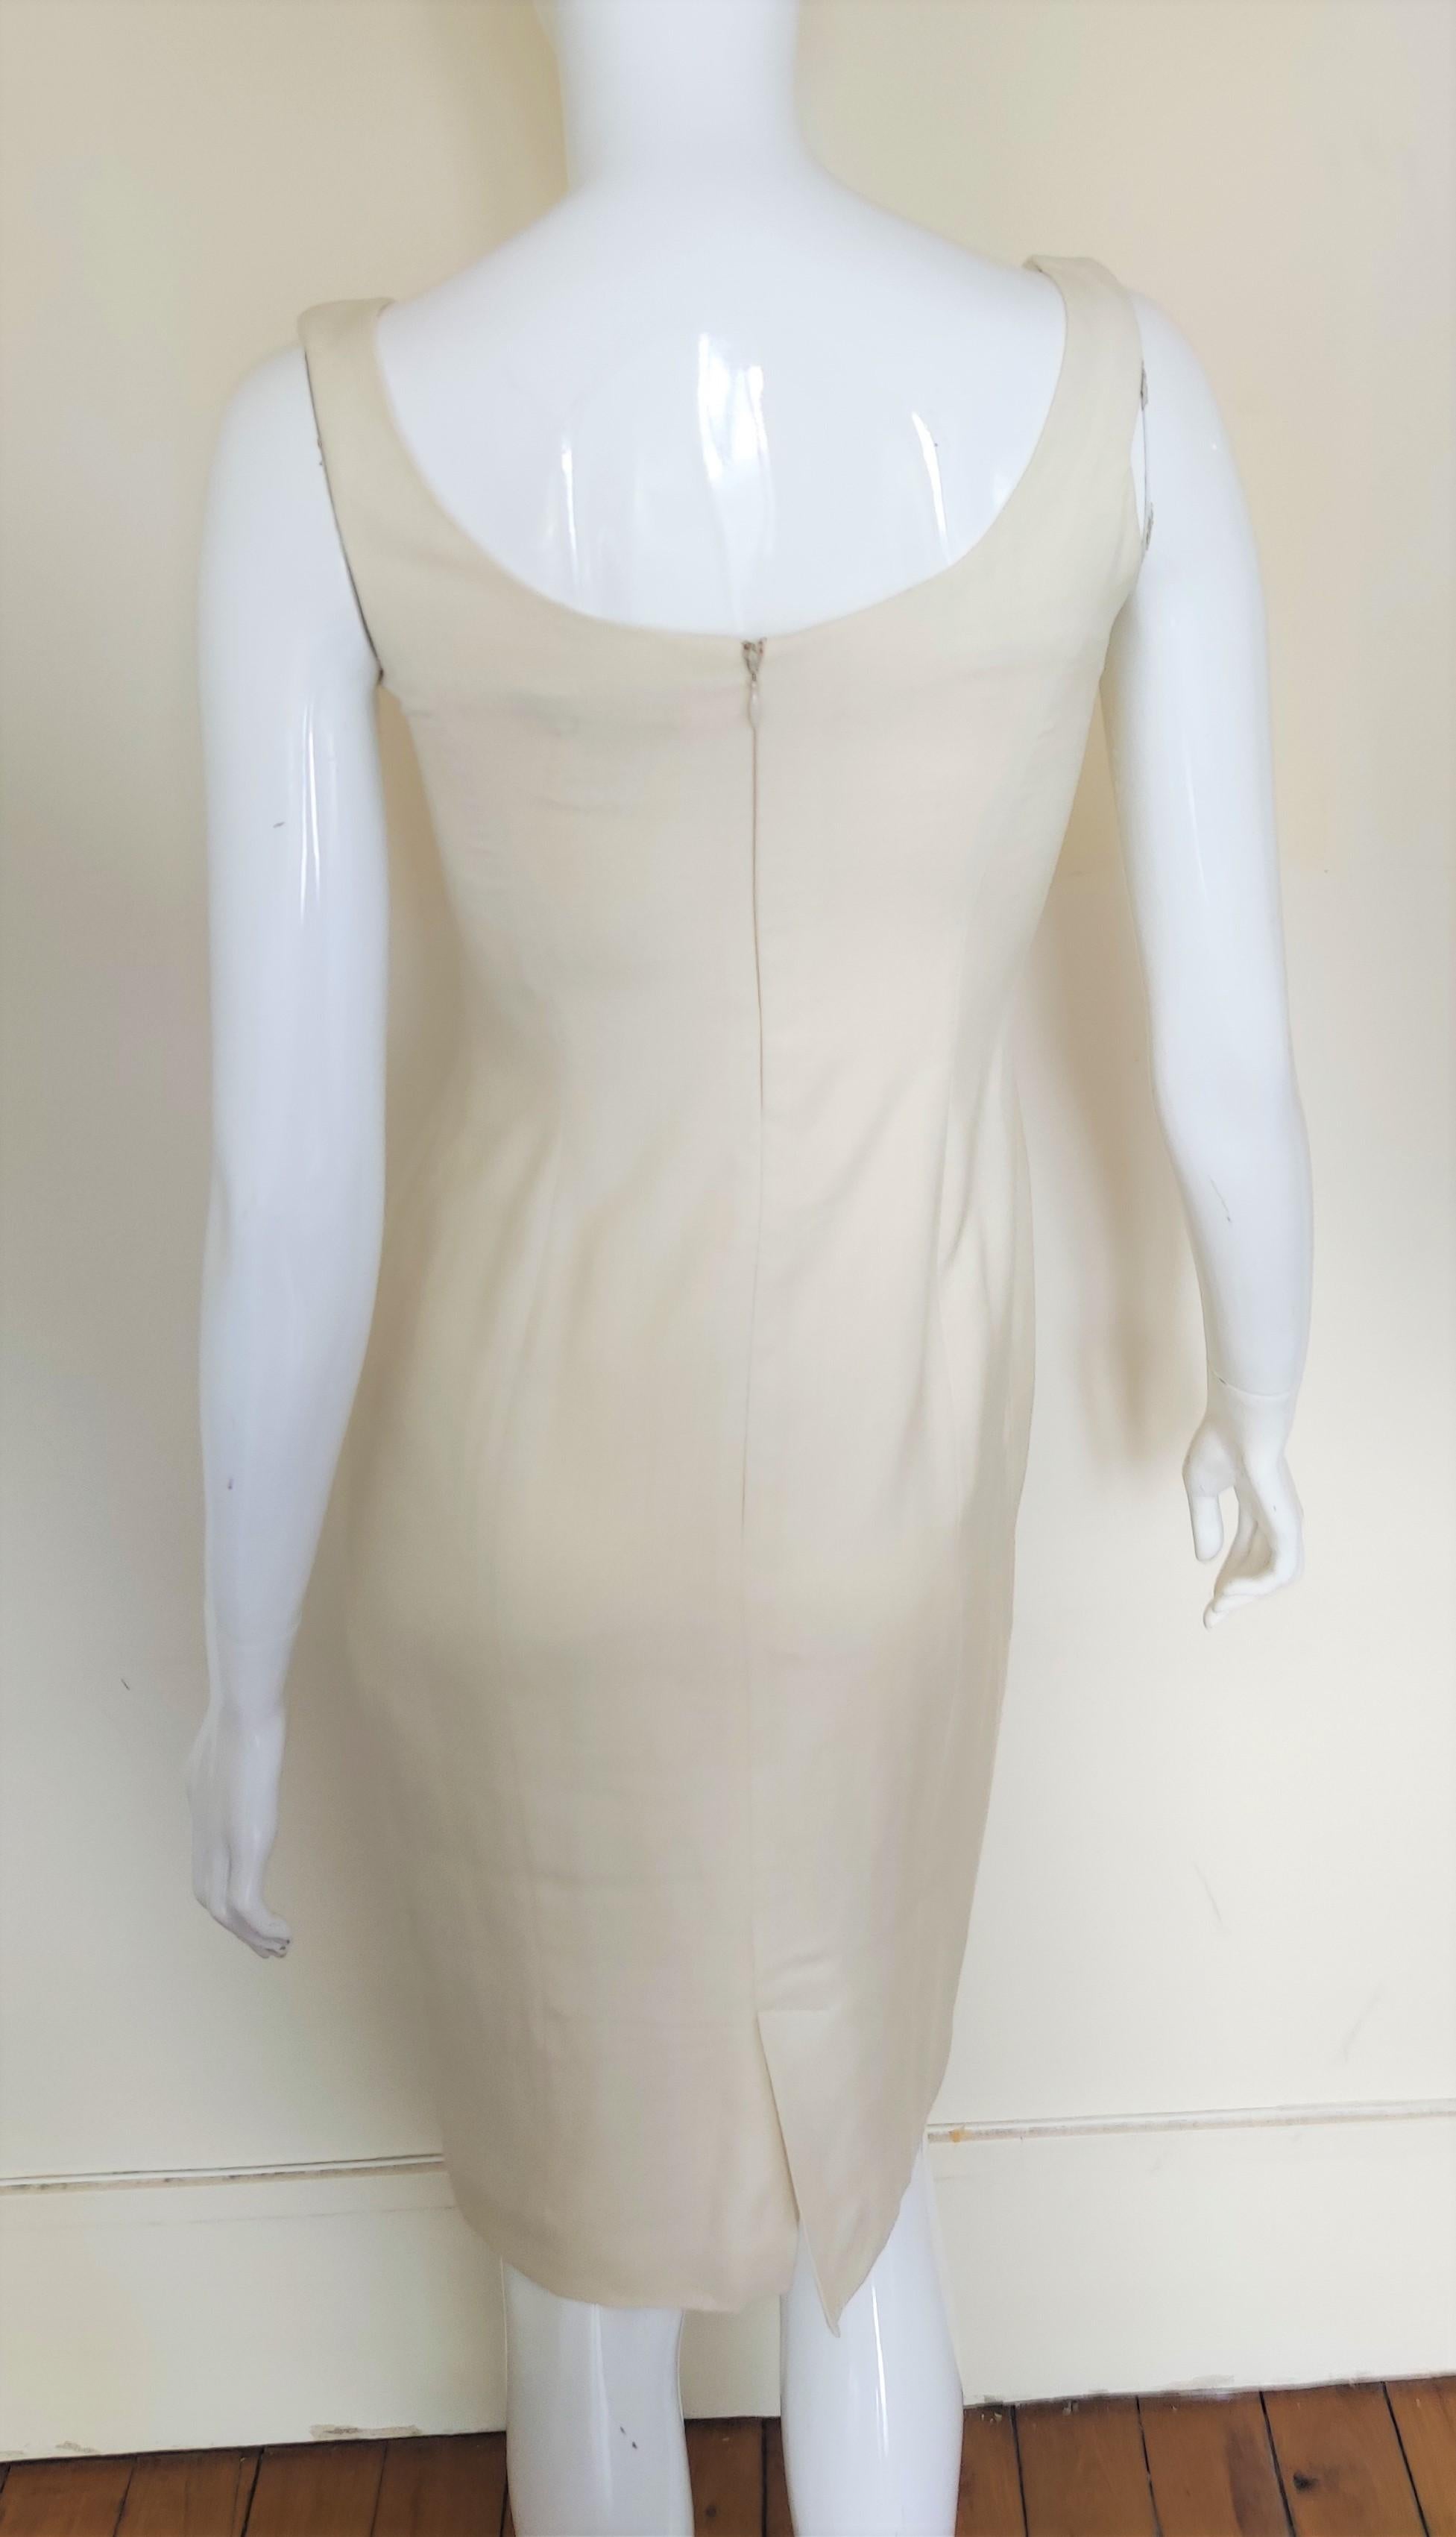 Early John Galliano S/S 1999 Runway Vintage Ivory Ensemble Dress Costume Suit For Sale 11